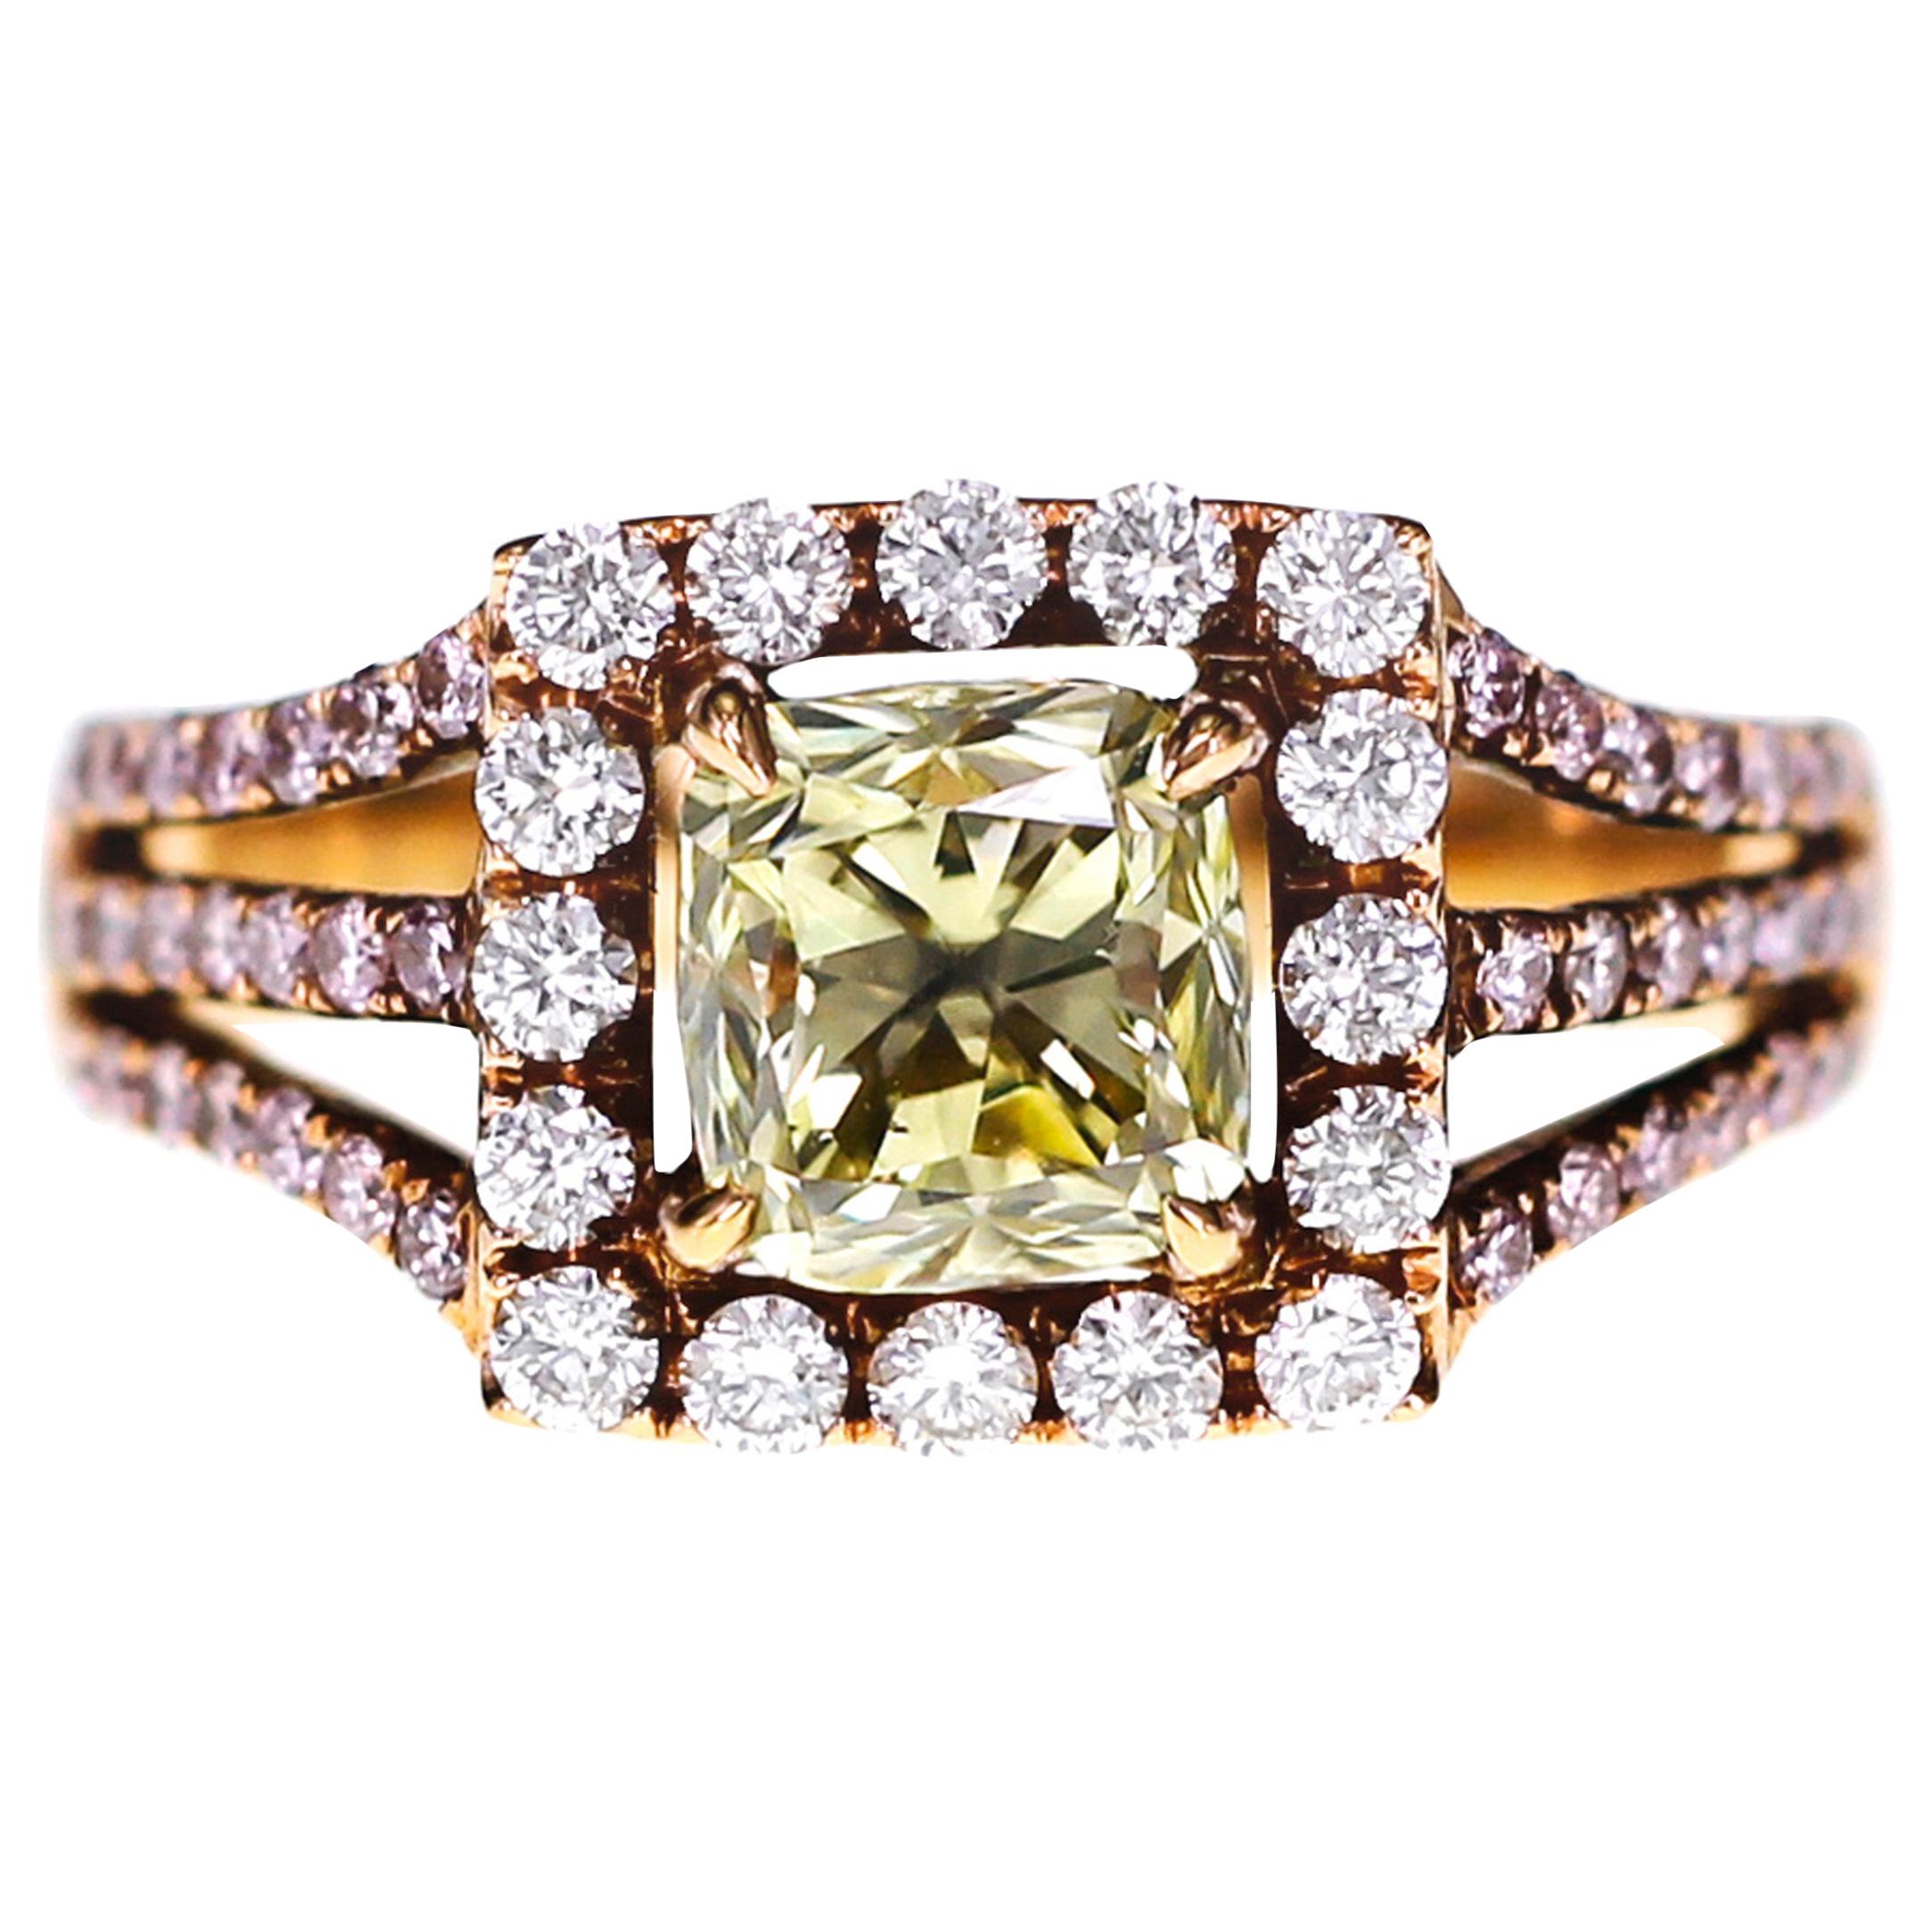 IGI Certified 1.70 Carat Natural Fancy Light Yellow Diamond Solitaire Ring For Sale